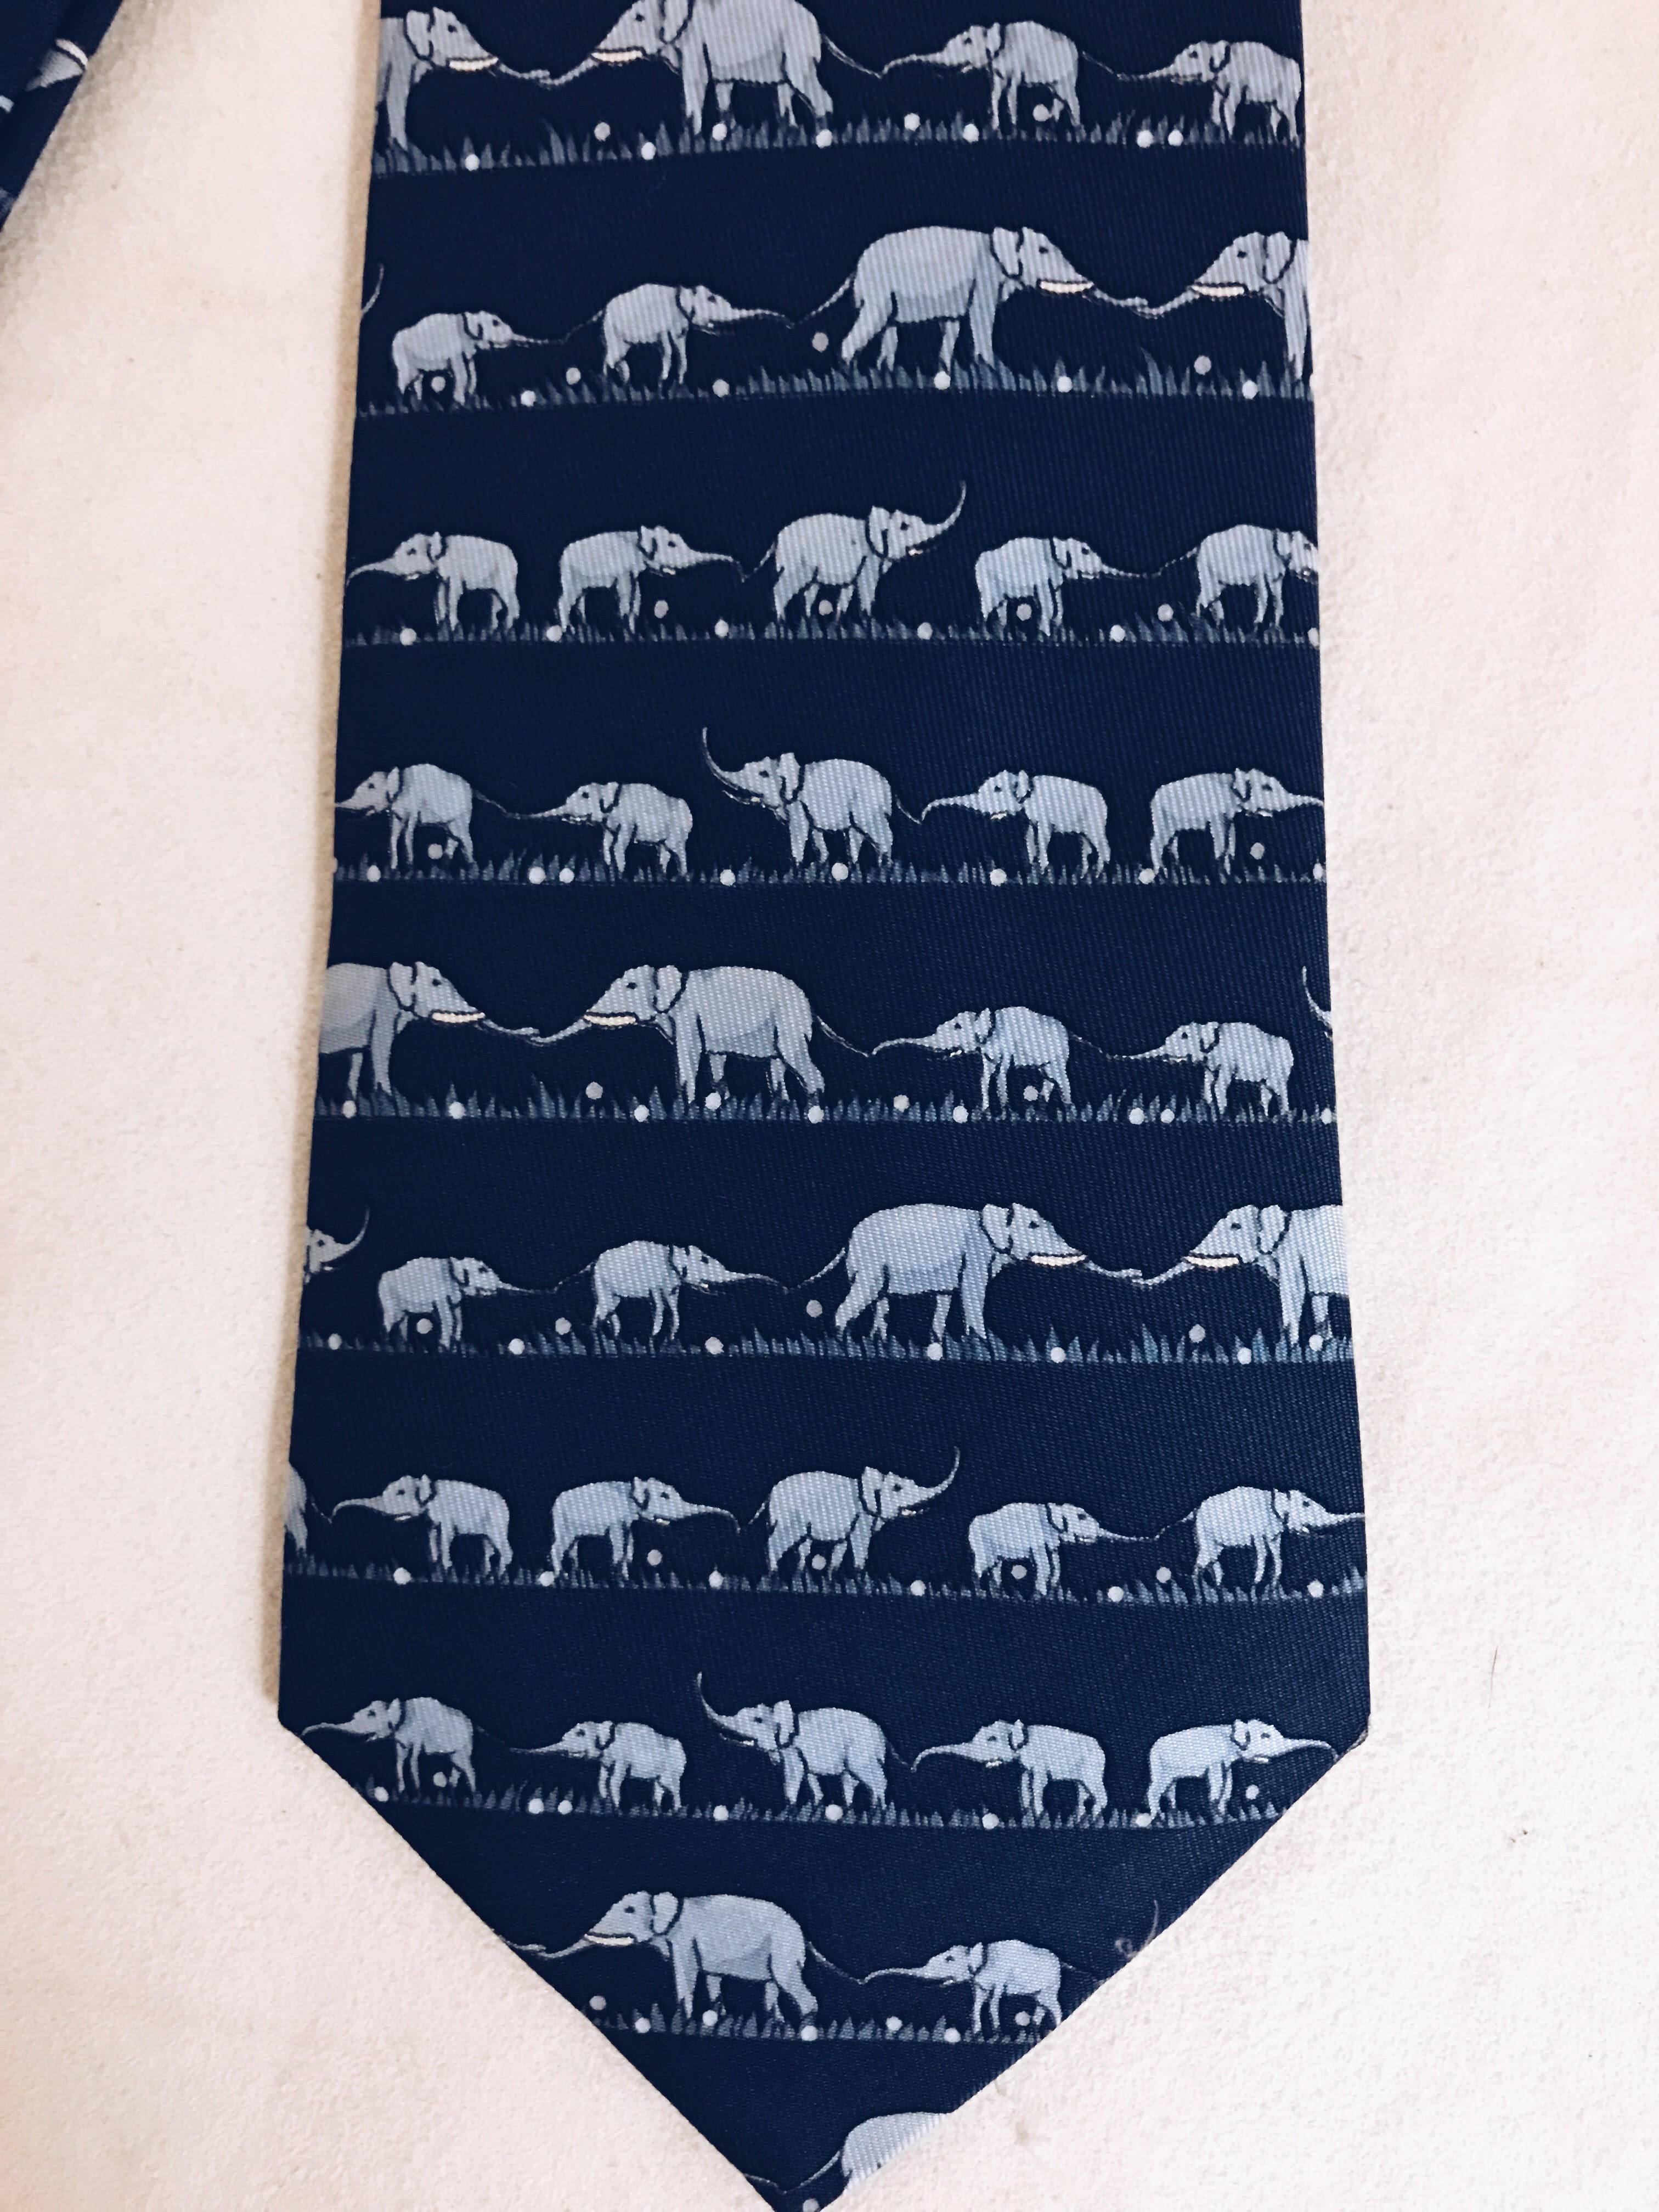 This Hermes tie with parading elephants is the perfect nod to your party affiliation, or just for the love of elephants!  In shades of blue, using the finest silk. Hand stitched finishes.